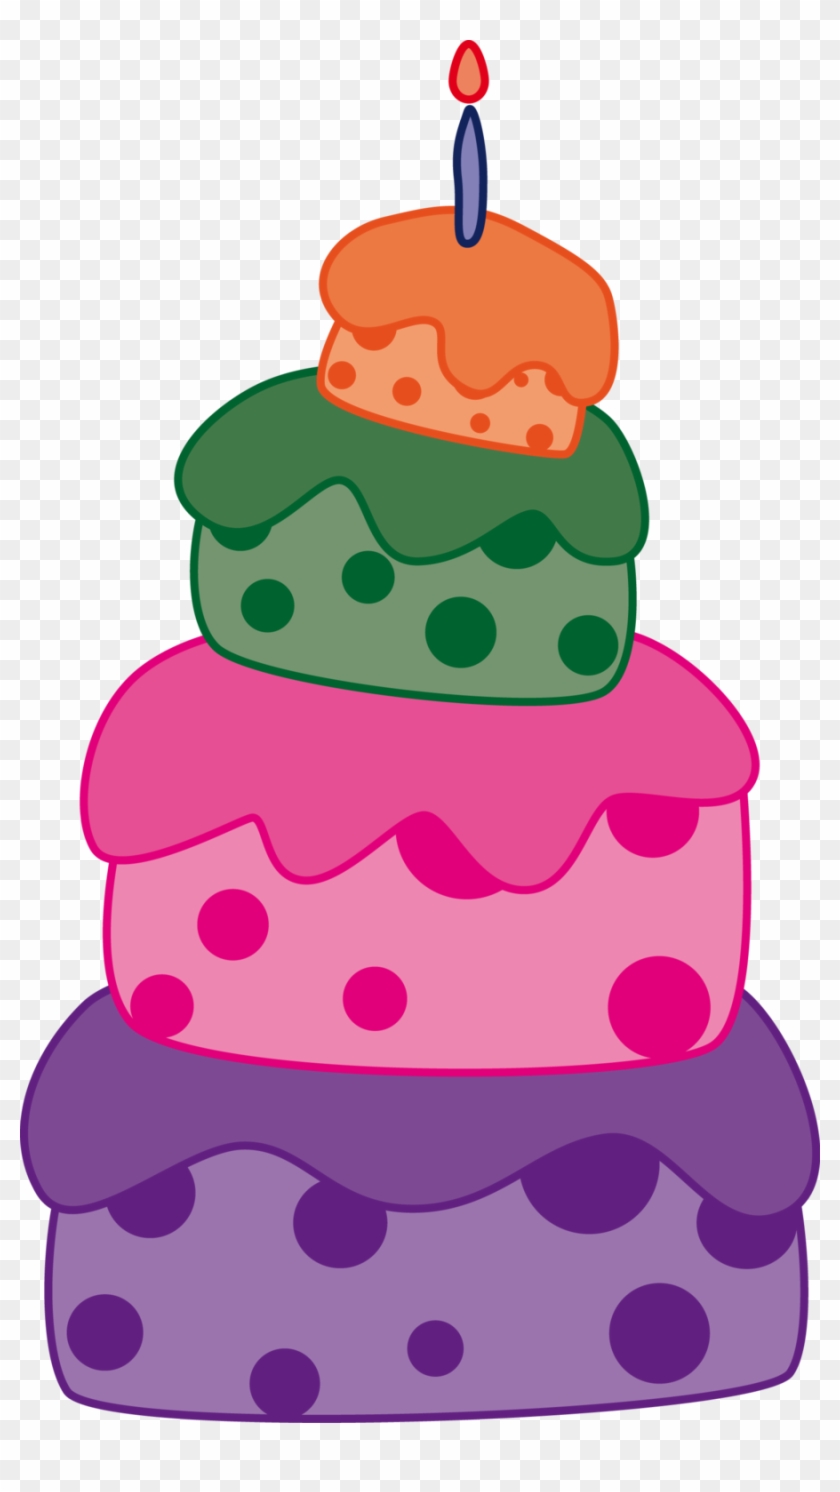 Cake- Pastel 1 By Gth089 - Pastel 1 Año Png #1143084